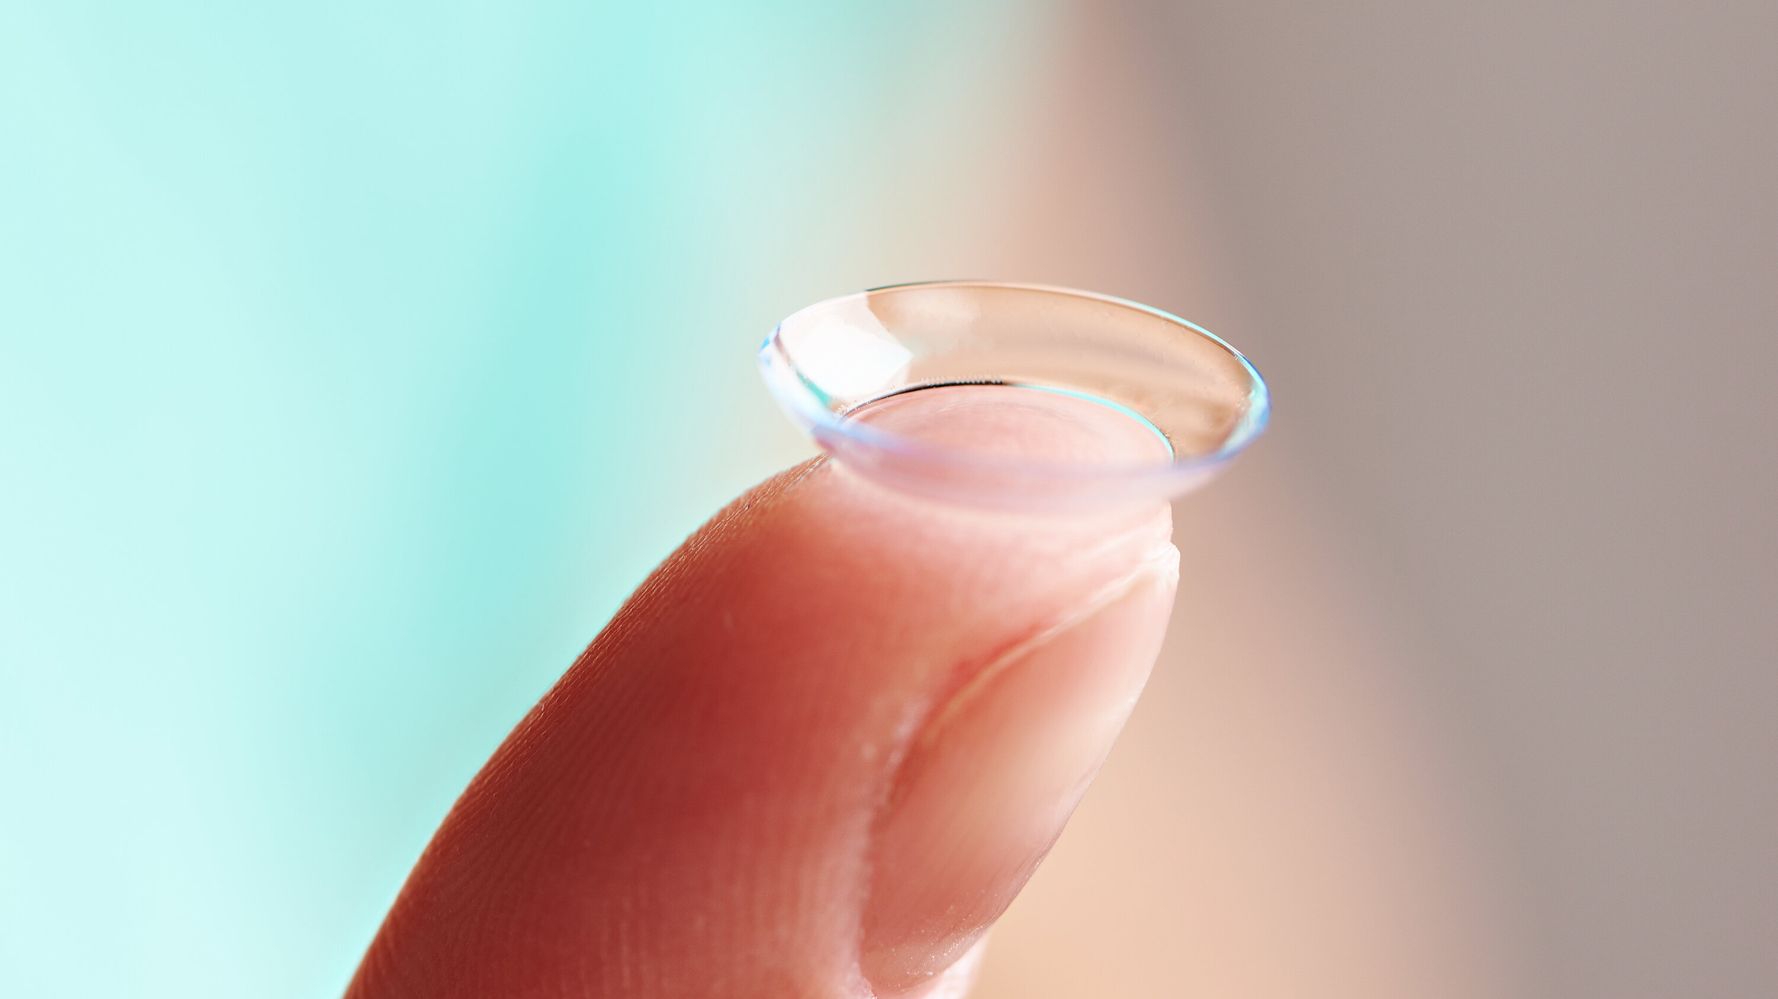 johnson-johnson-contact-lenses-recalled-over-fears-they-might-scratch